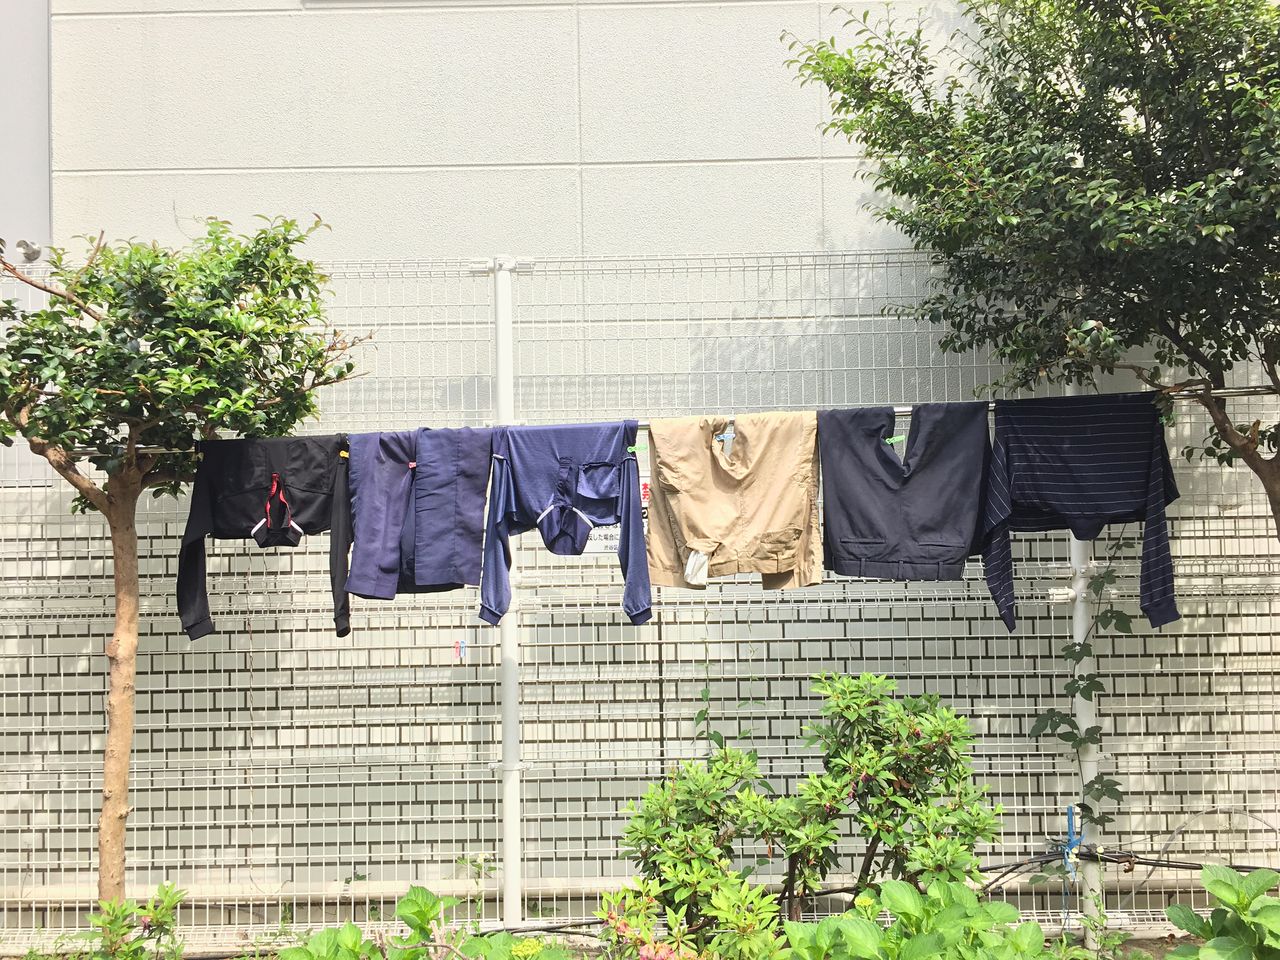 View of clothes line against the wall